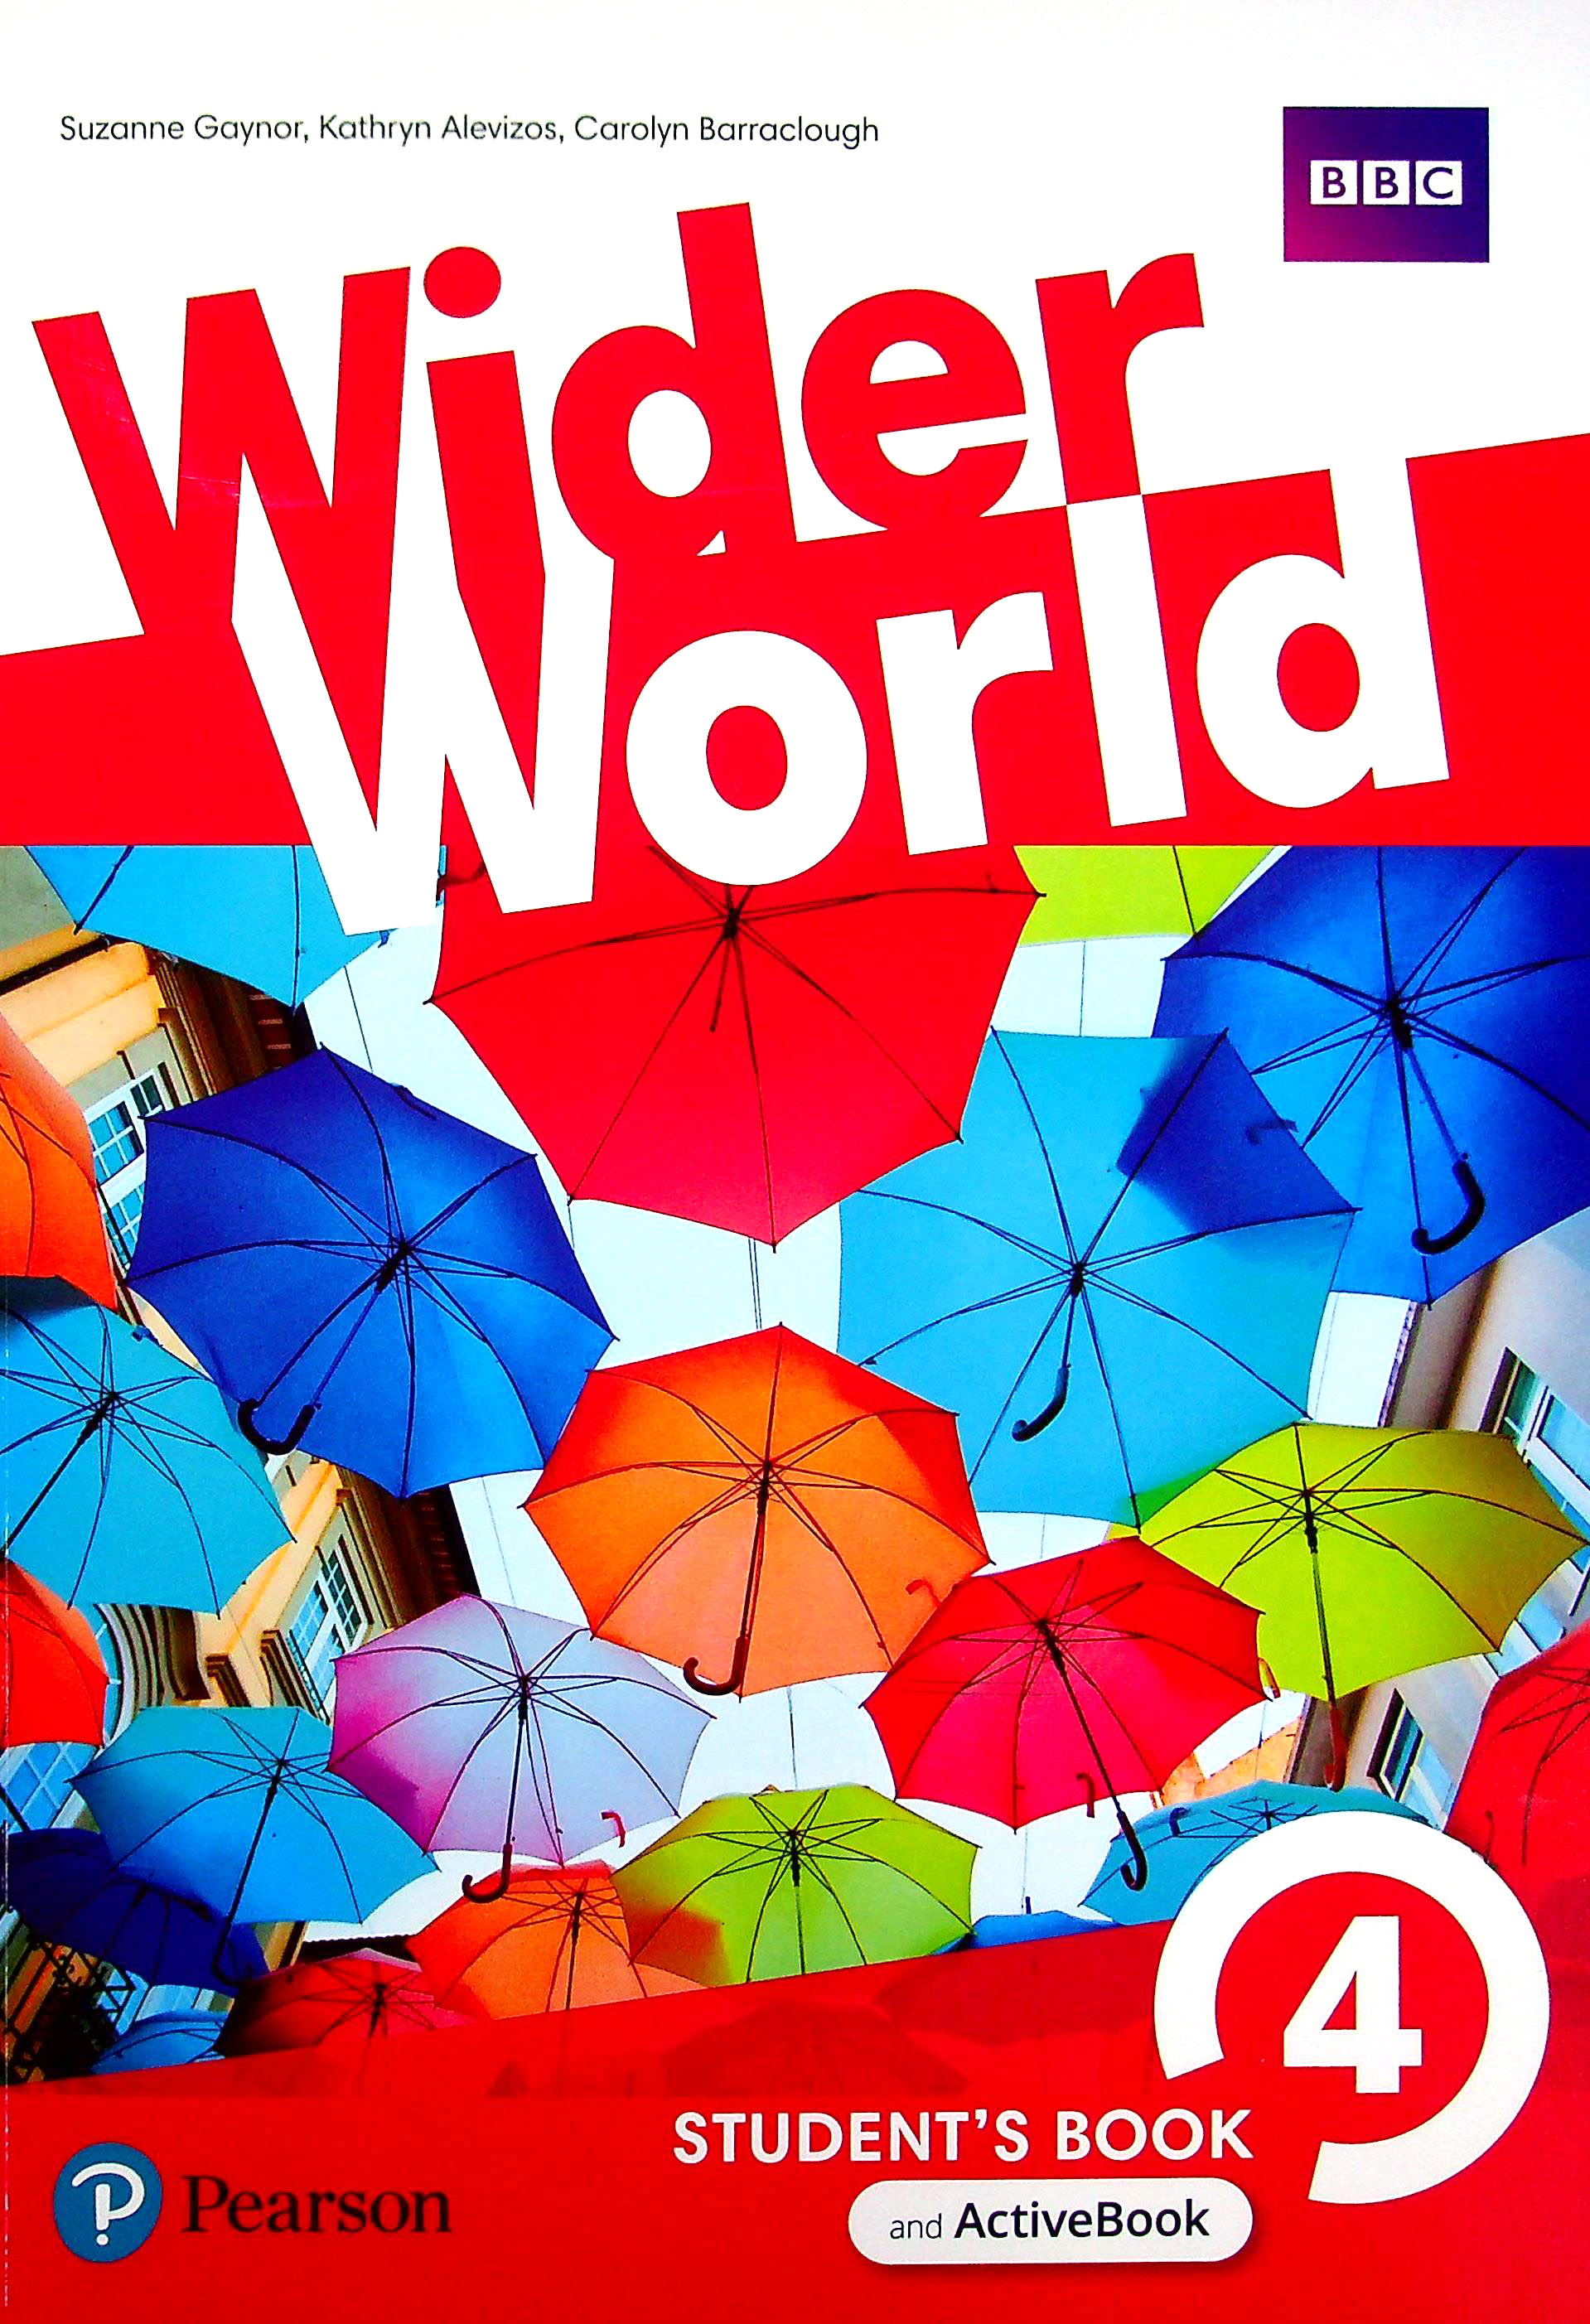 WIDER WORLD 4 Student's Book + Active Book